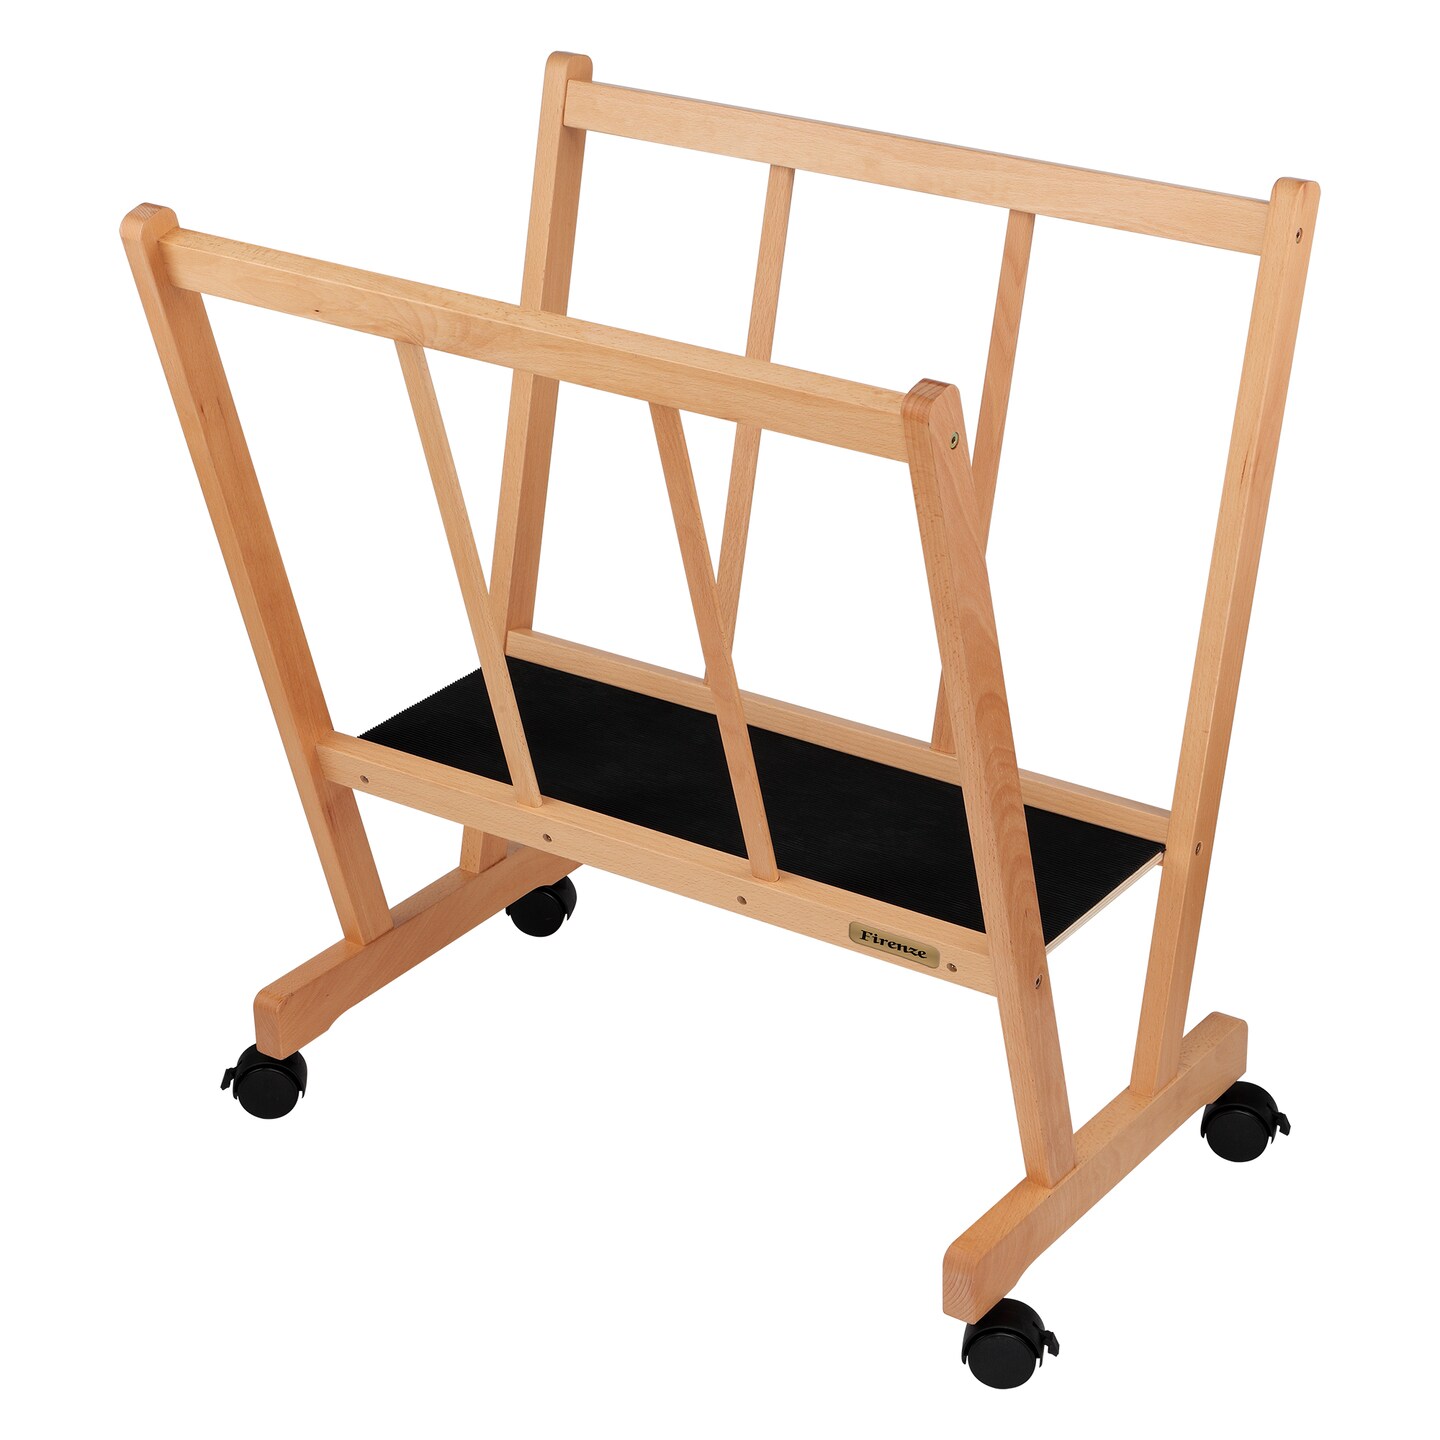 Creative Mark Firenze Wood Large Print Rack with Castors - Perfect for Display of Canvas, Art, Prints, Panels, Posters, Art Gallery Shows, Storage Rack